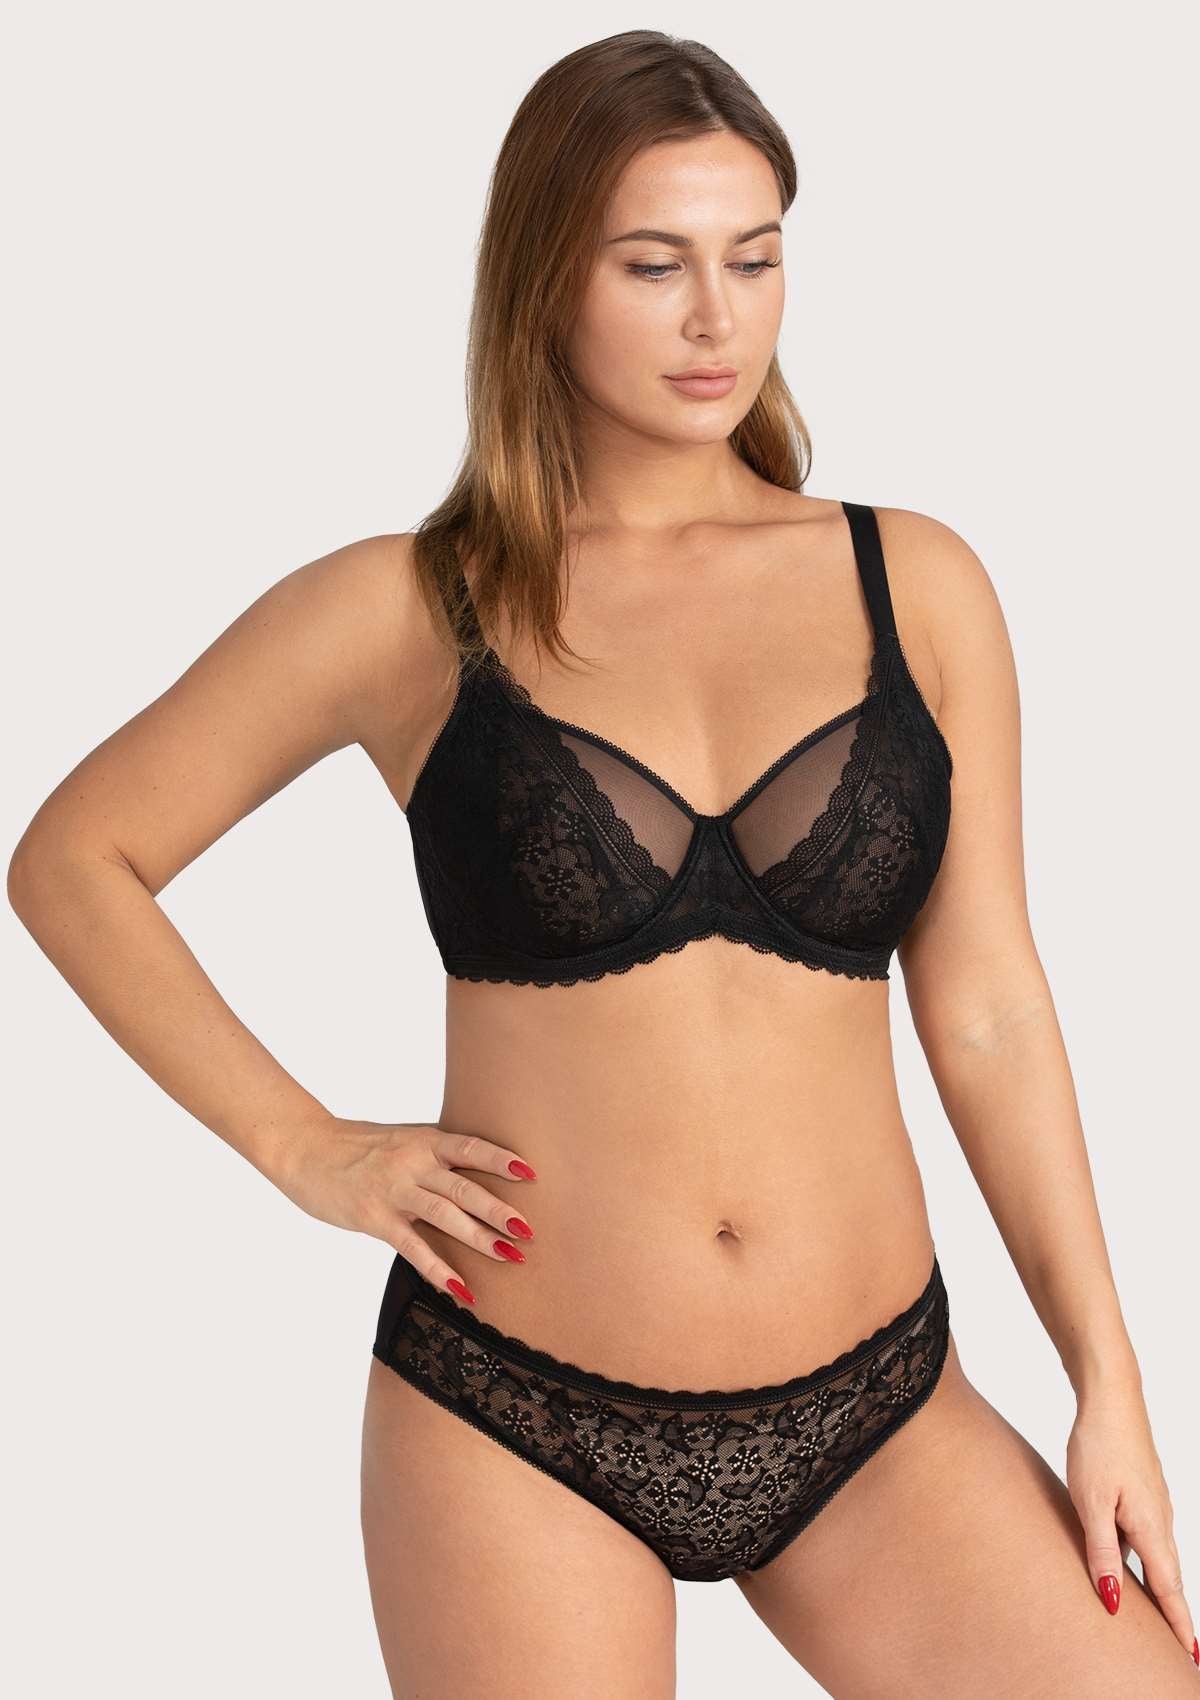 HSIA Anemone Lace Bra And Panties: Back Support Wired Bra - Black / 36 / C